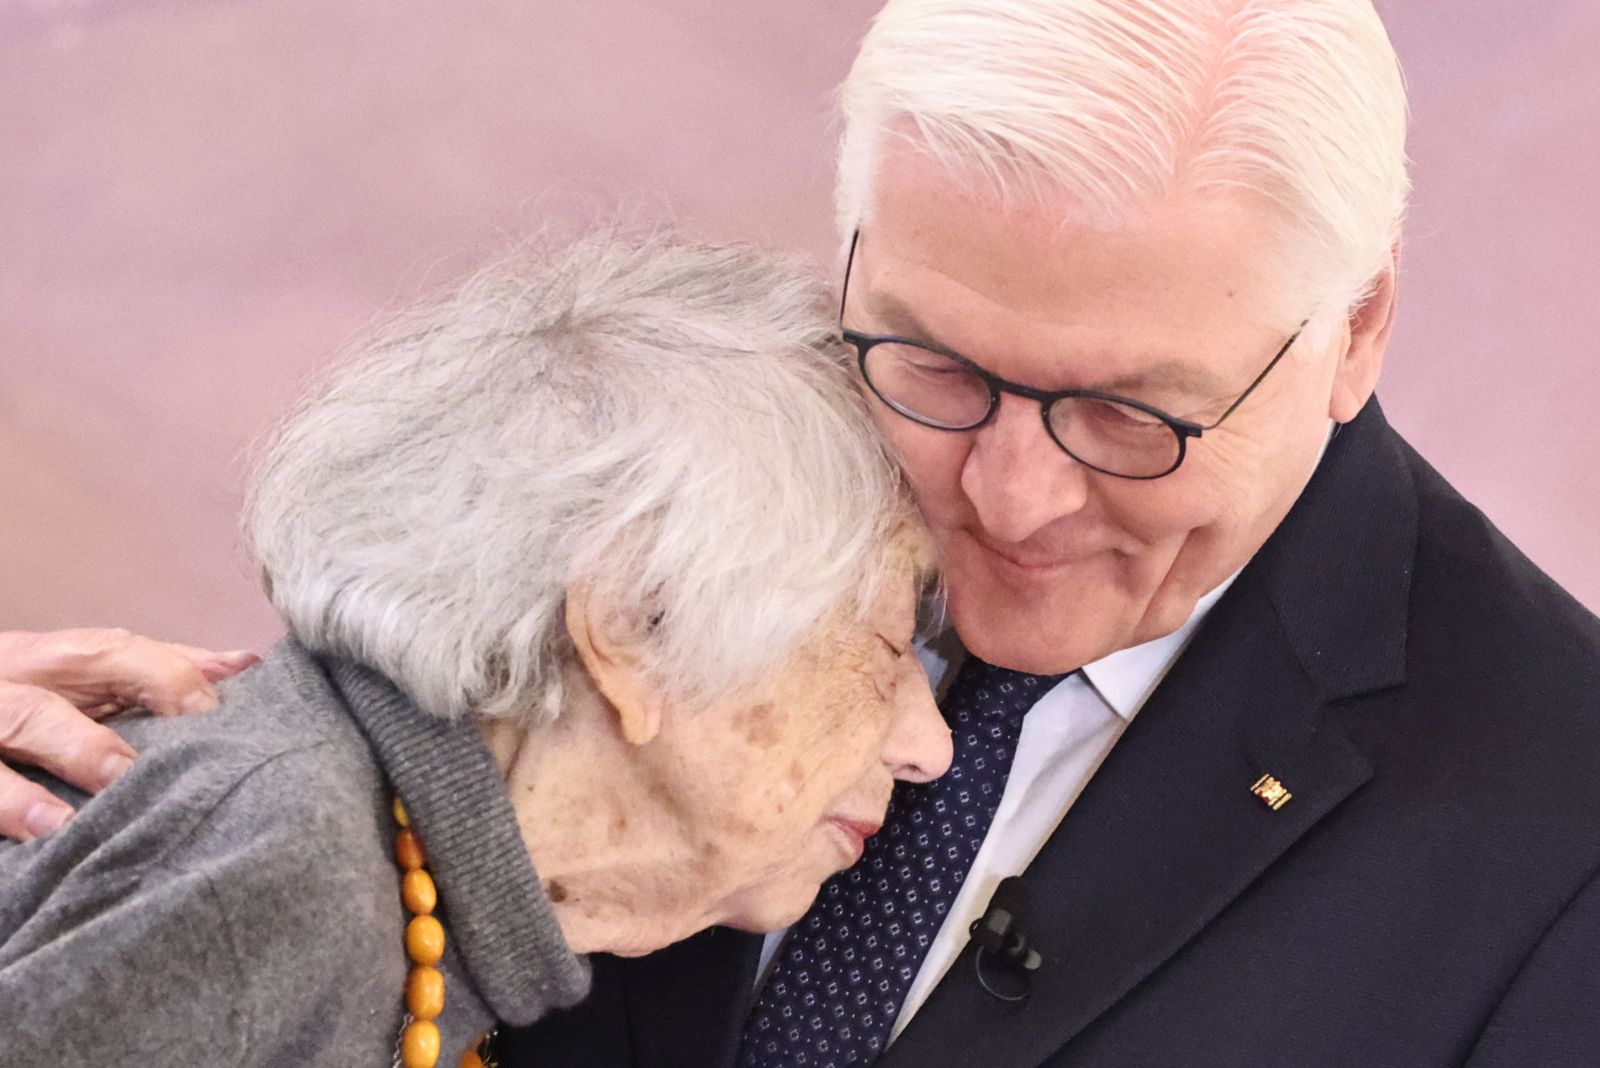 epa10964251 German President Frank-Walter Steinmeier (R) hugs Holocaust survivor Margot Friedlaender (L) during a meeting at Bellevue Palace in Berlin, Germany, 08 November 2023. Under the motto 'War in the Middle East: For peaceful coexistence in Germany!', German President Steinmeier held a round table to work for coexistence without anti-Semitism and hostility towards Muslims.  EPA/CLEMENS BILAN